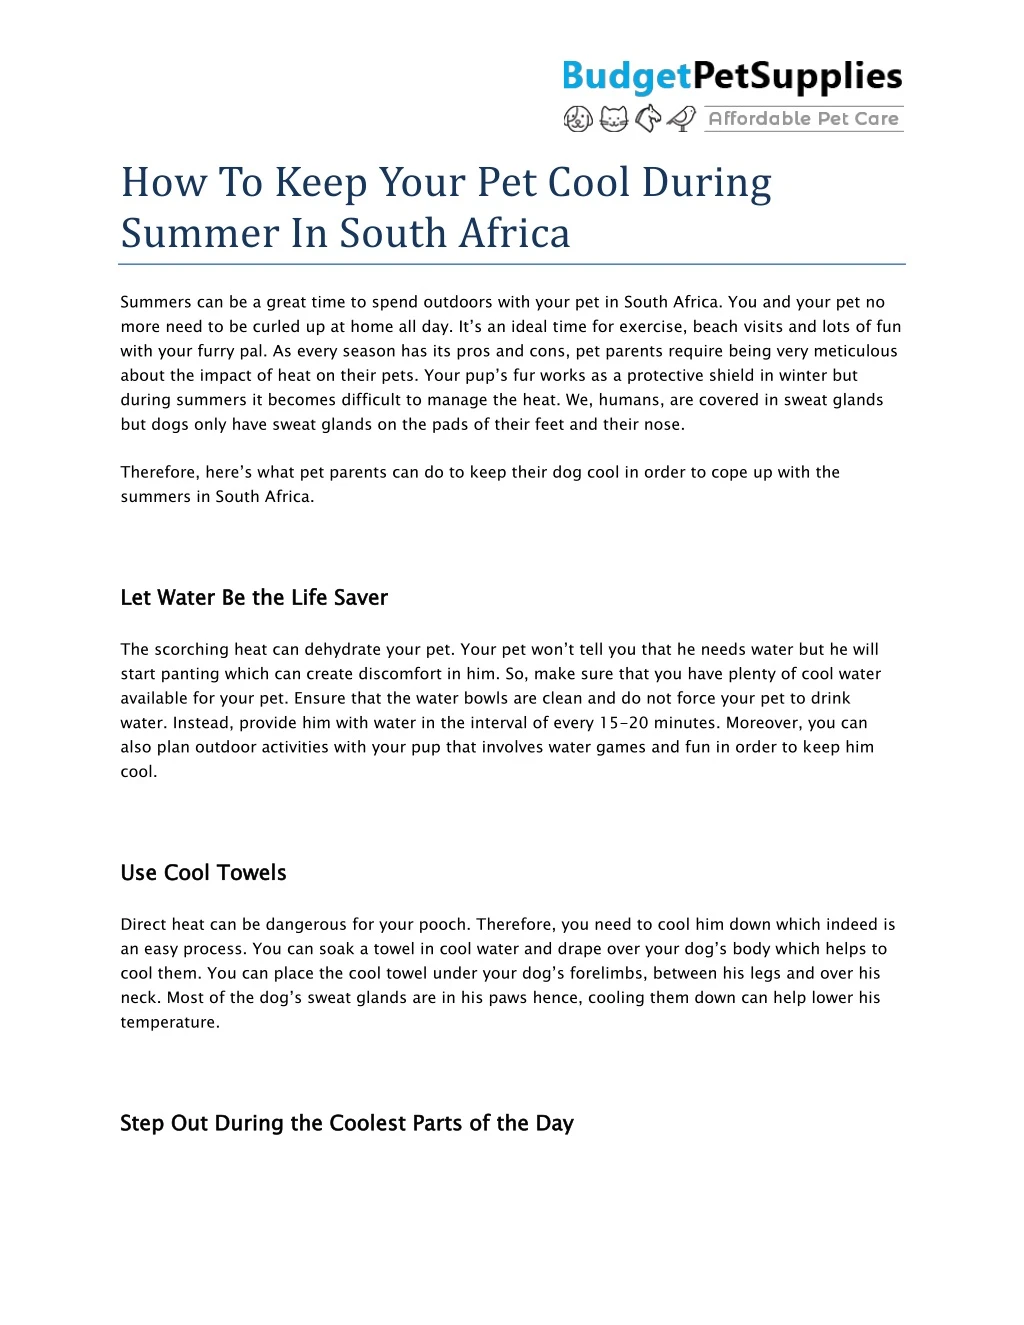 how to keep your pet cool during summer in south